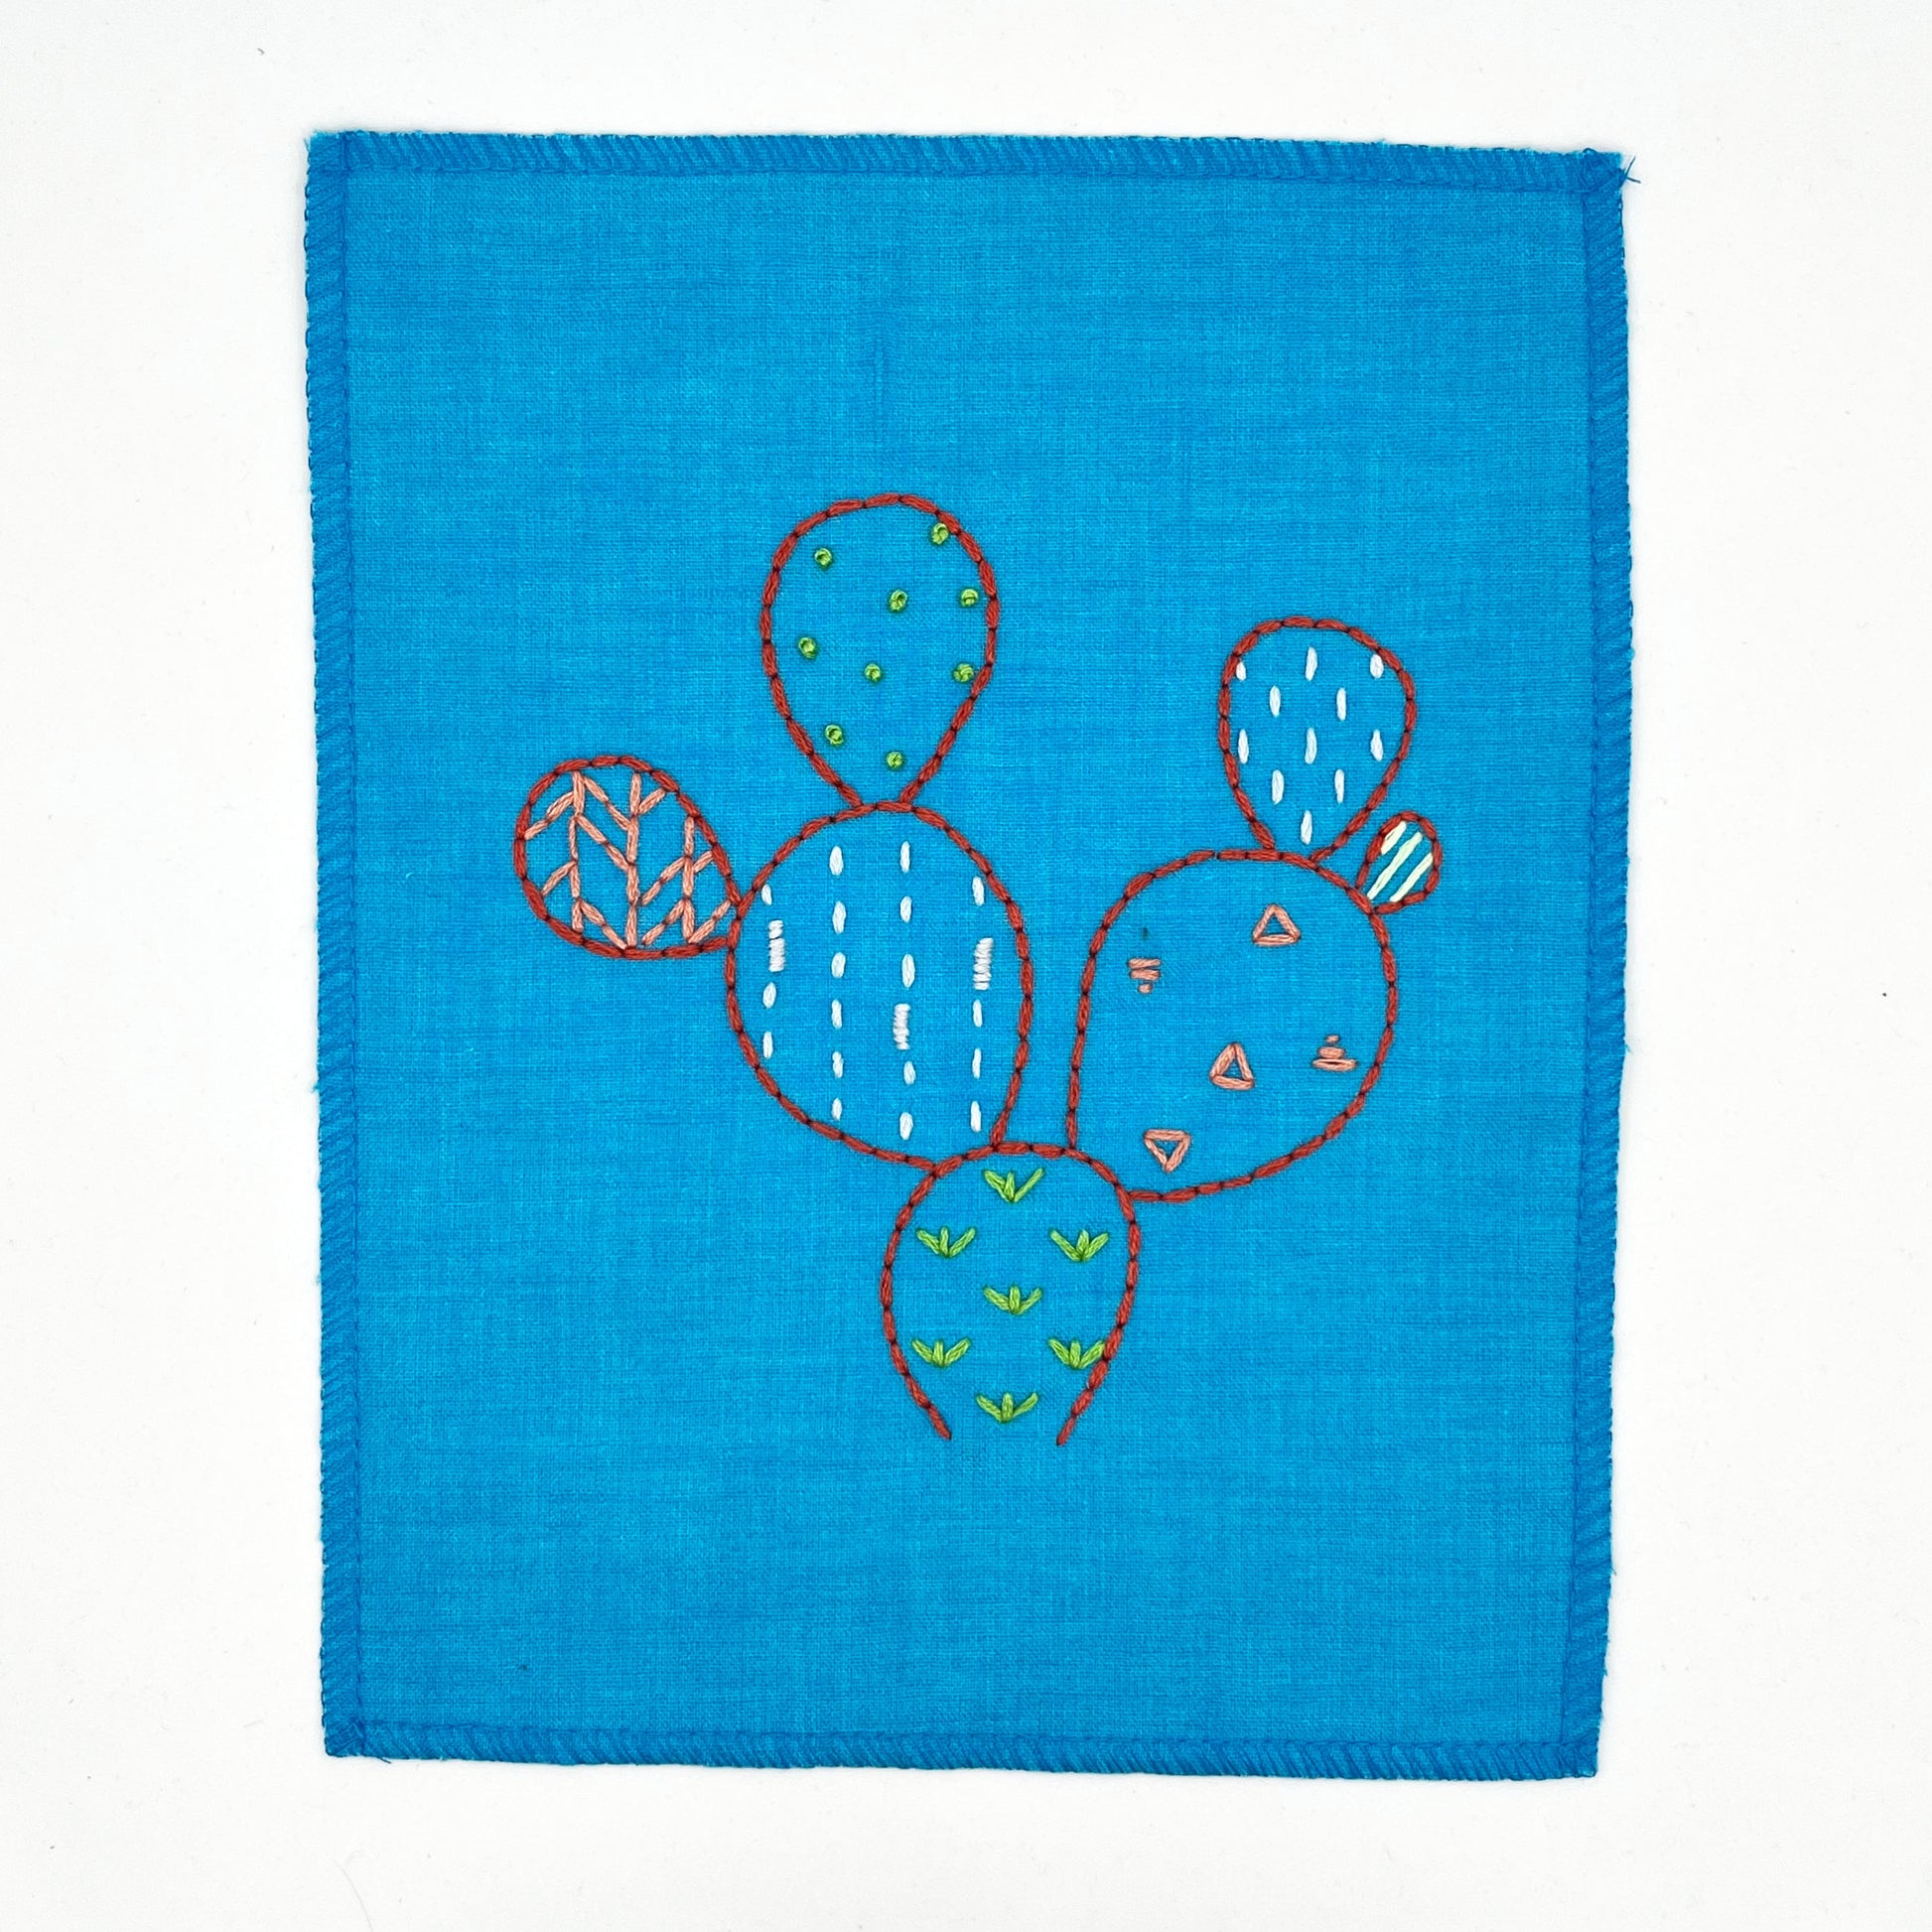 a small bright blue fabric wall hanging, hand embroidered with the outline of a prickly pear cactus in red, each pad filled with different stitches like french knots, running stitches and triangles, in different colors, on a white background